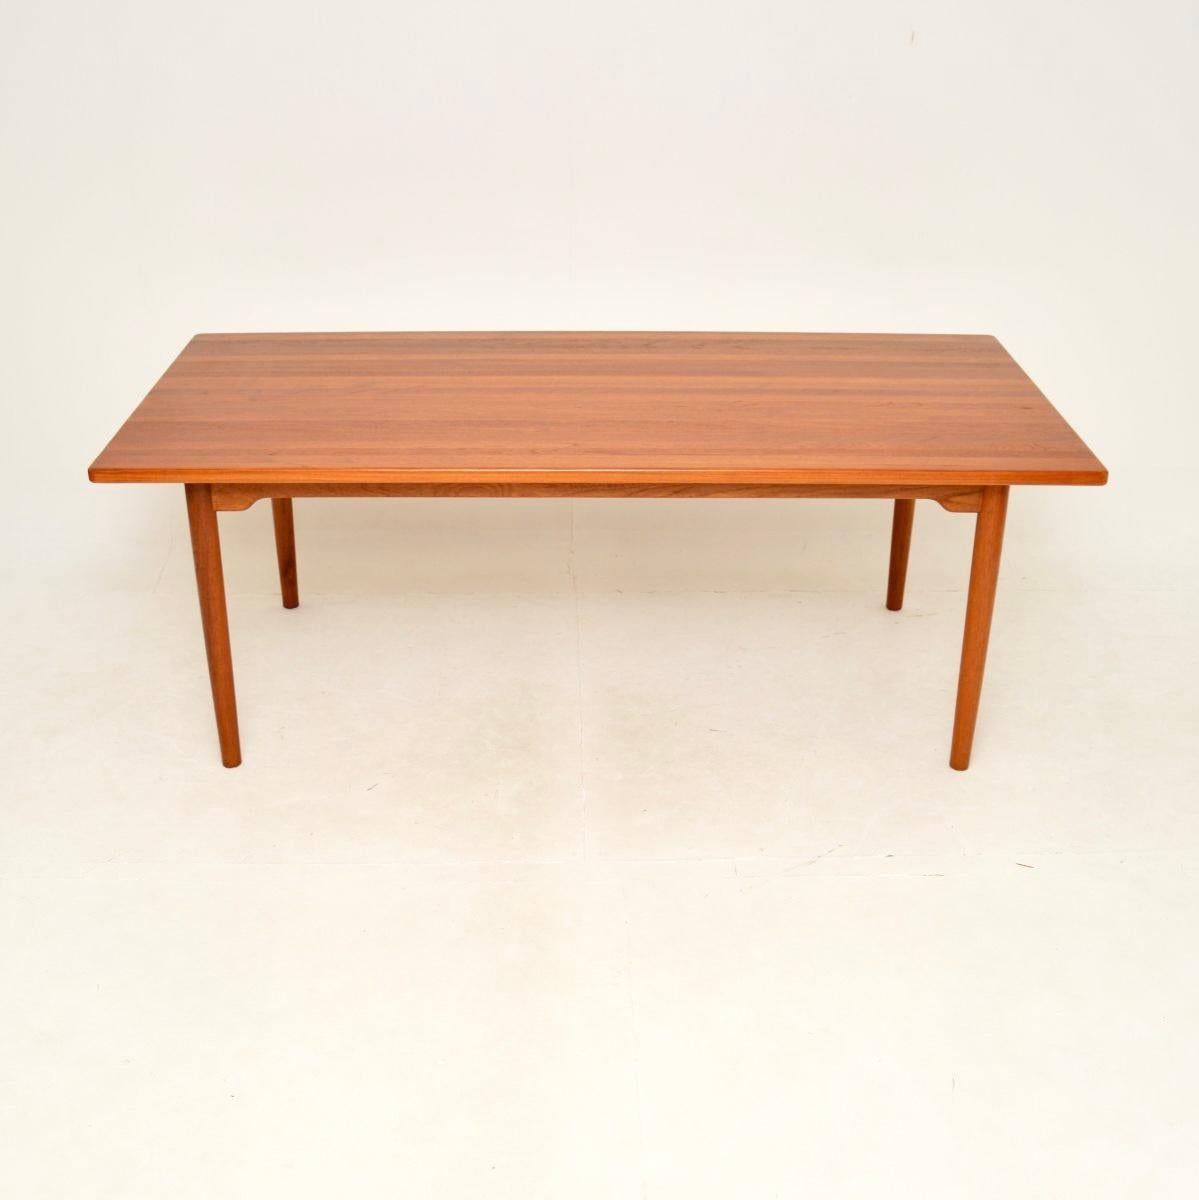 An outstanding Danish vintage solid teak dining table, dating from the 1960’s.

This is of superb quality, with completely solid teak construction and a very stylish design. It comfortable seats eight, and goes extremely well with a set of eight